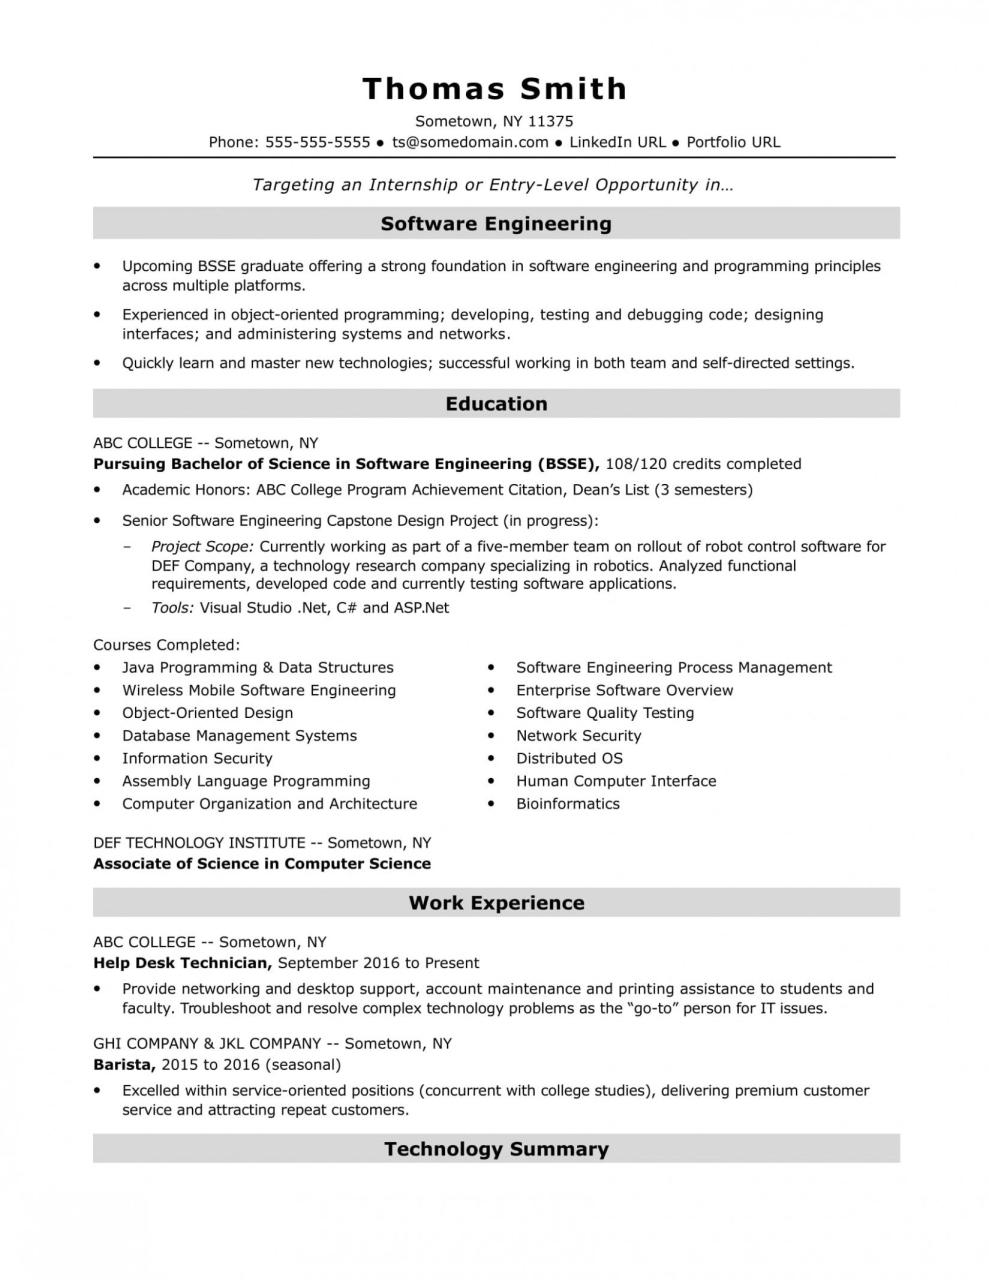 Entry Level Network Security Engineer Resume BEST RESUME EXAMPLES